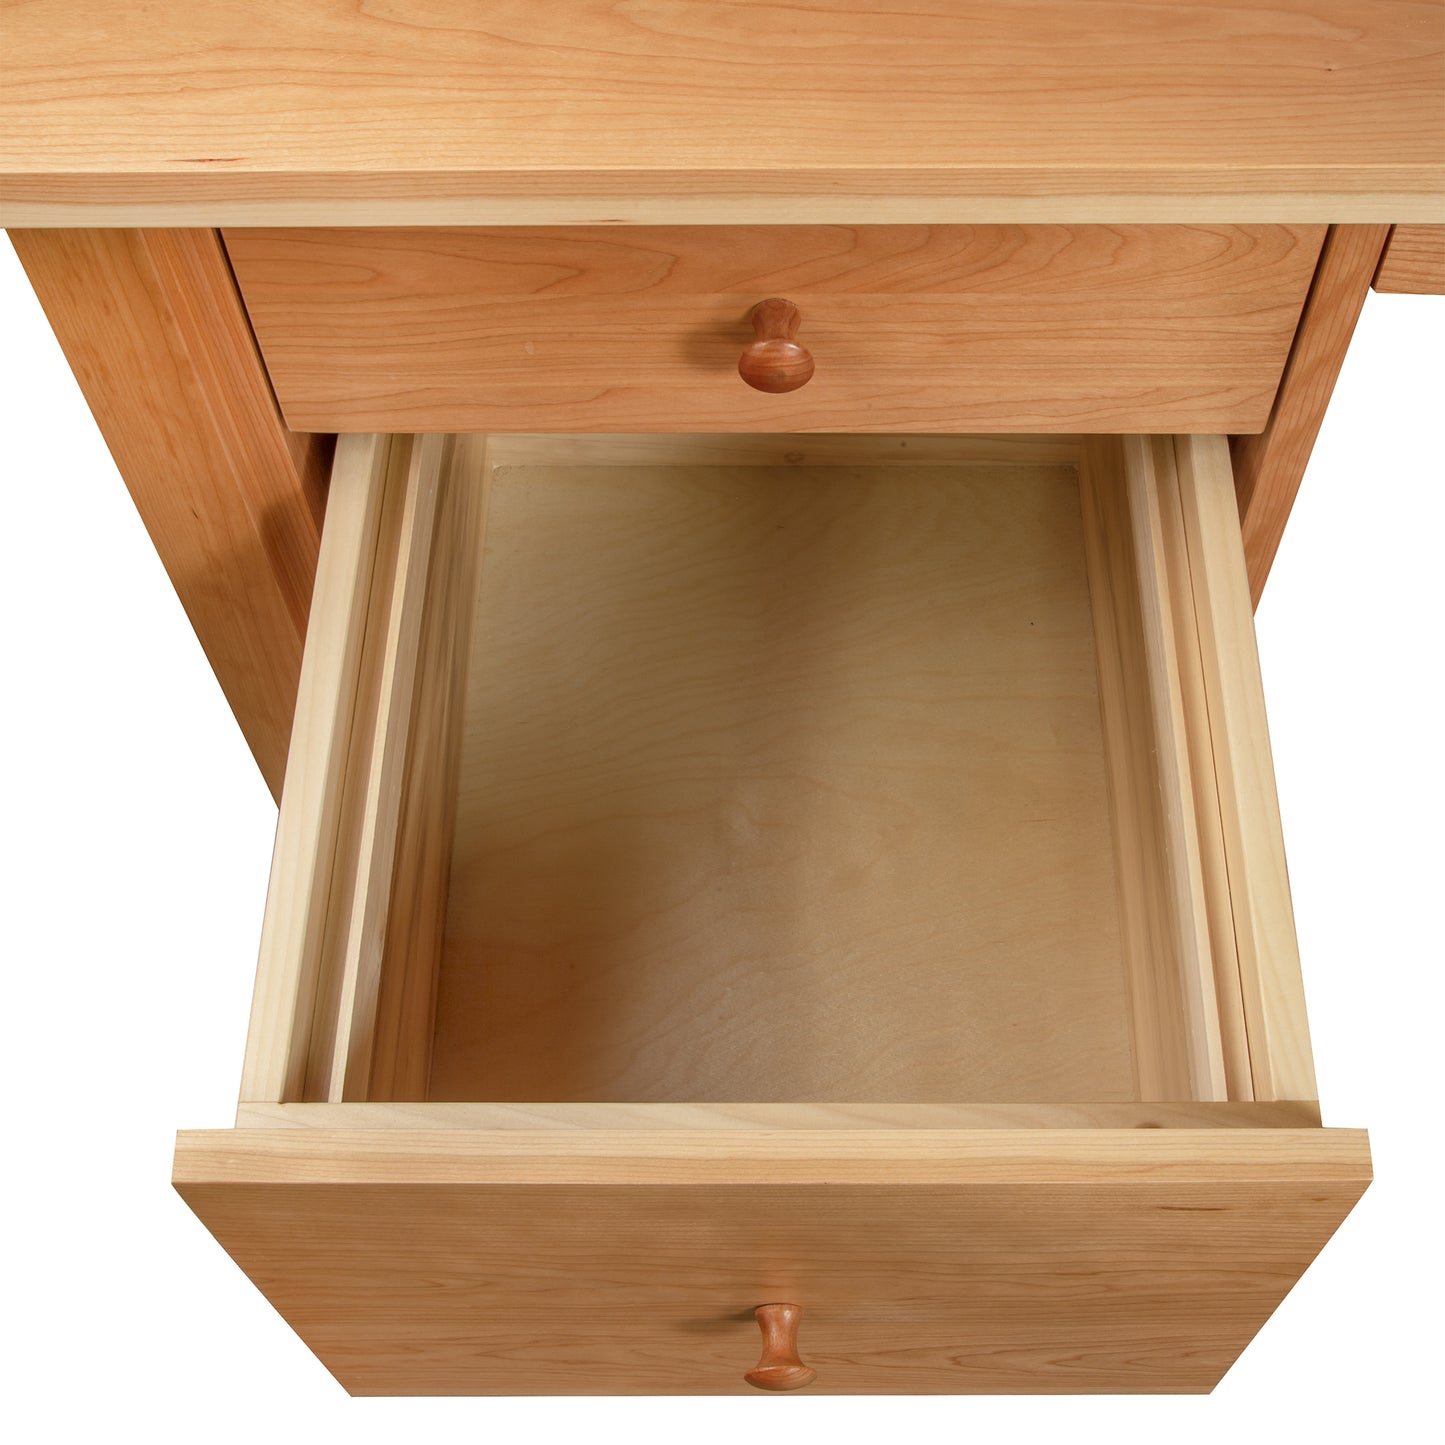 A Lyndon Furniture Small Wood Executive Desk with a drawer for office necessities.